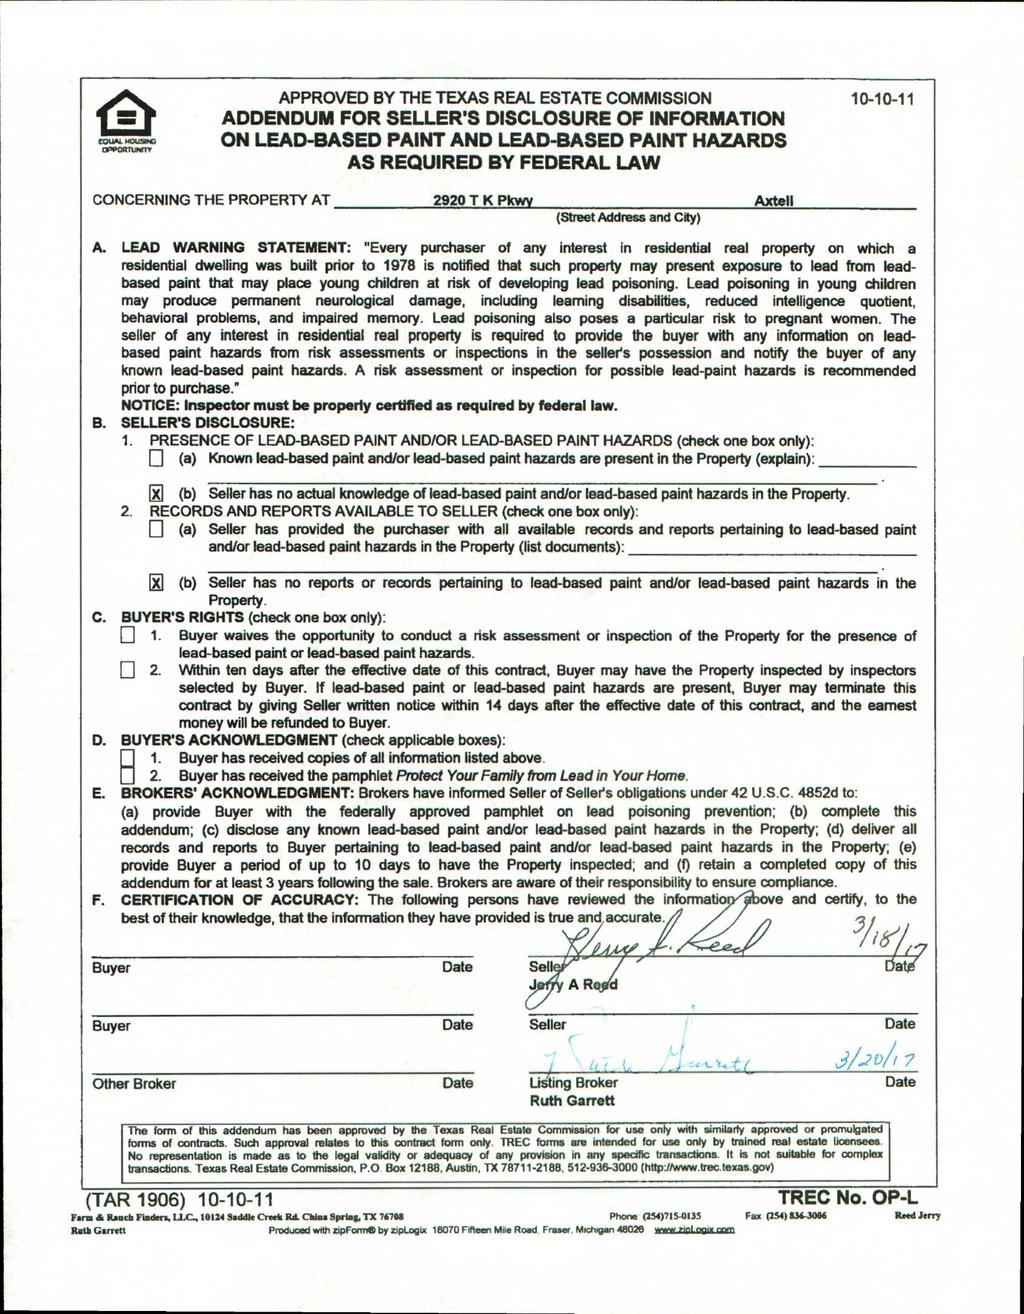 COUAL HOUSING OPPOIITIAM APPROVED BY THE TEXAS REAL ESTATE COMMISSION ADDENDUM FOR SELLER'S DISCLOSURE OF INFORMATION ON LEAD-BASED PAINT AND LEAD-BASED PAINT HAZARDS AS REQUIRED BY FEDERAL LAW